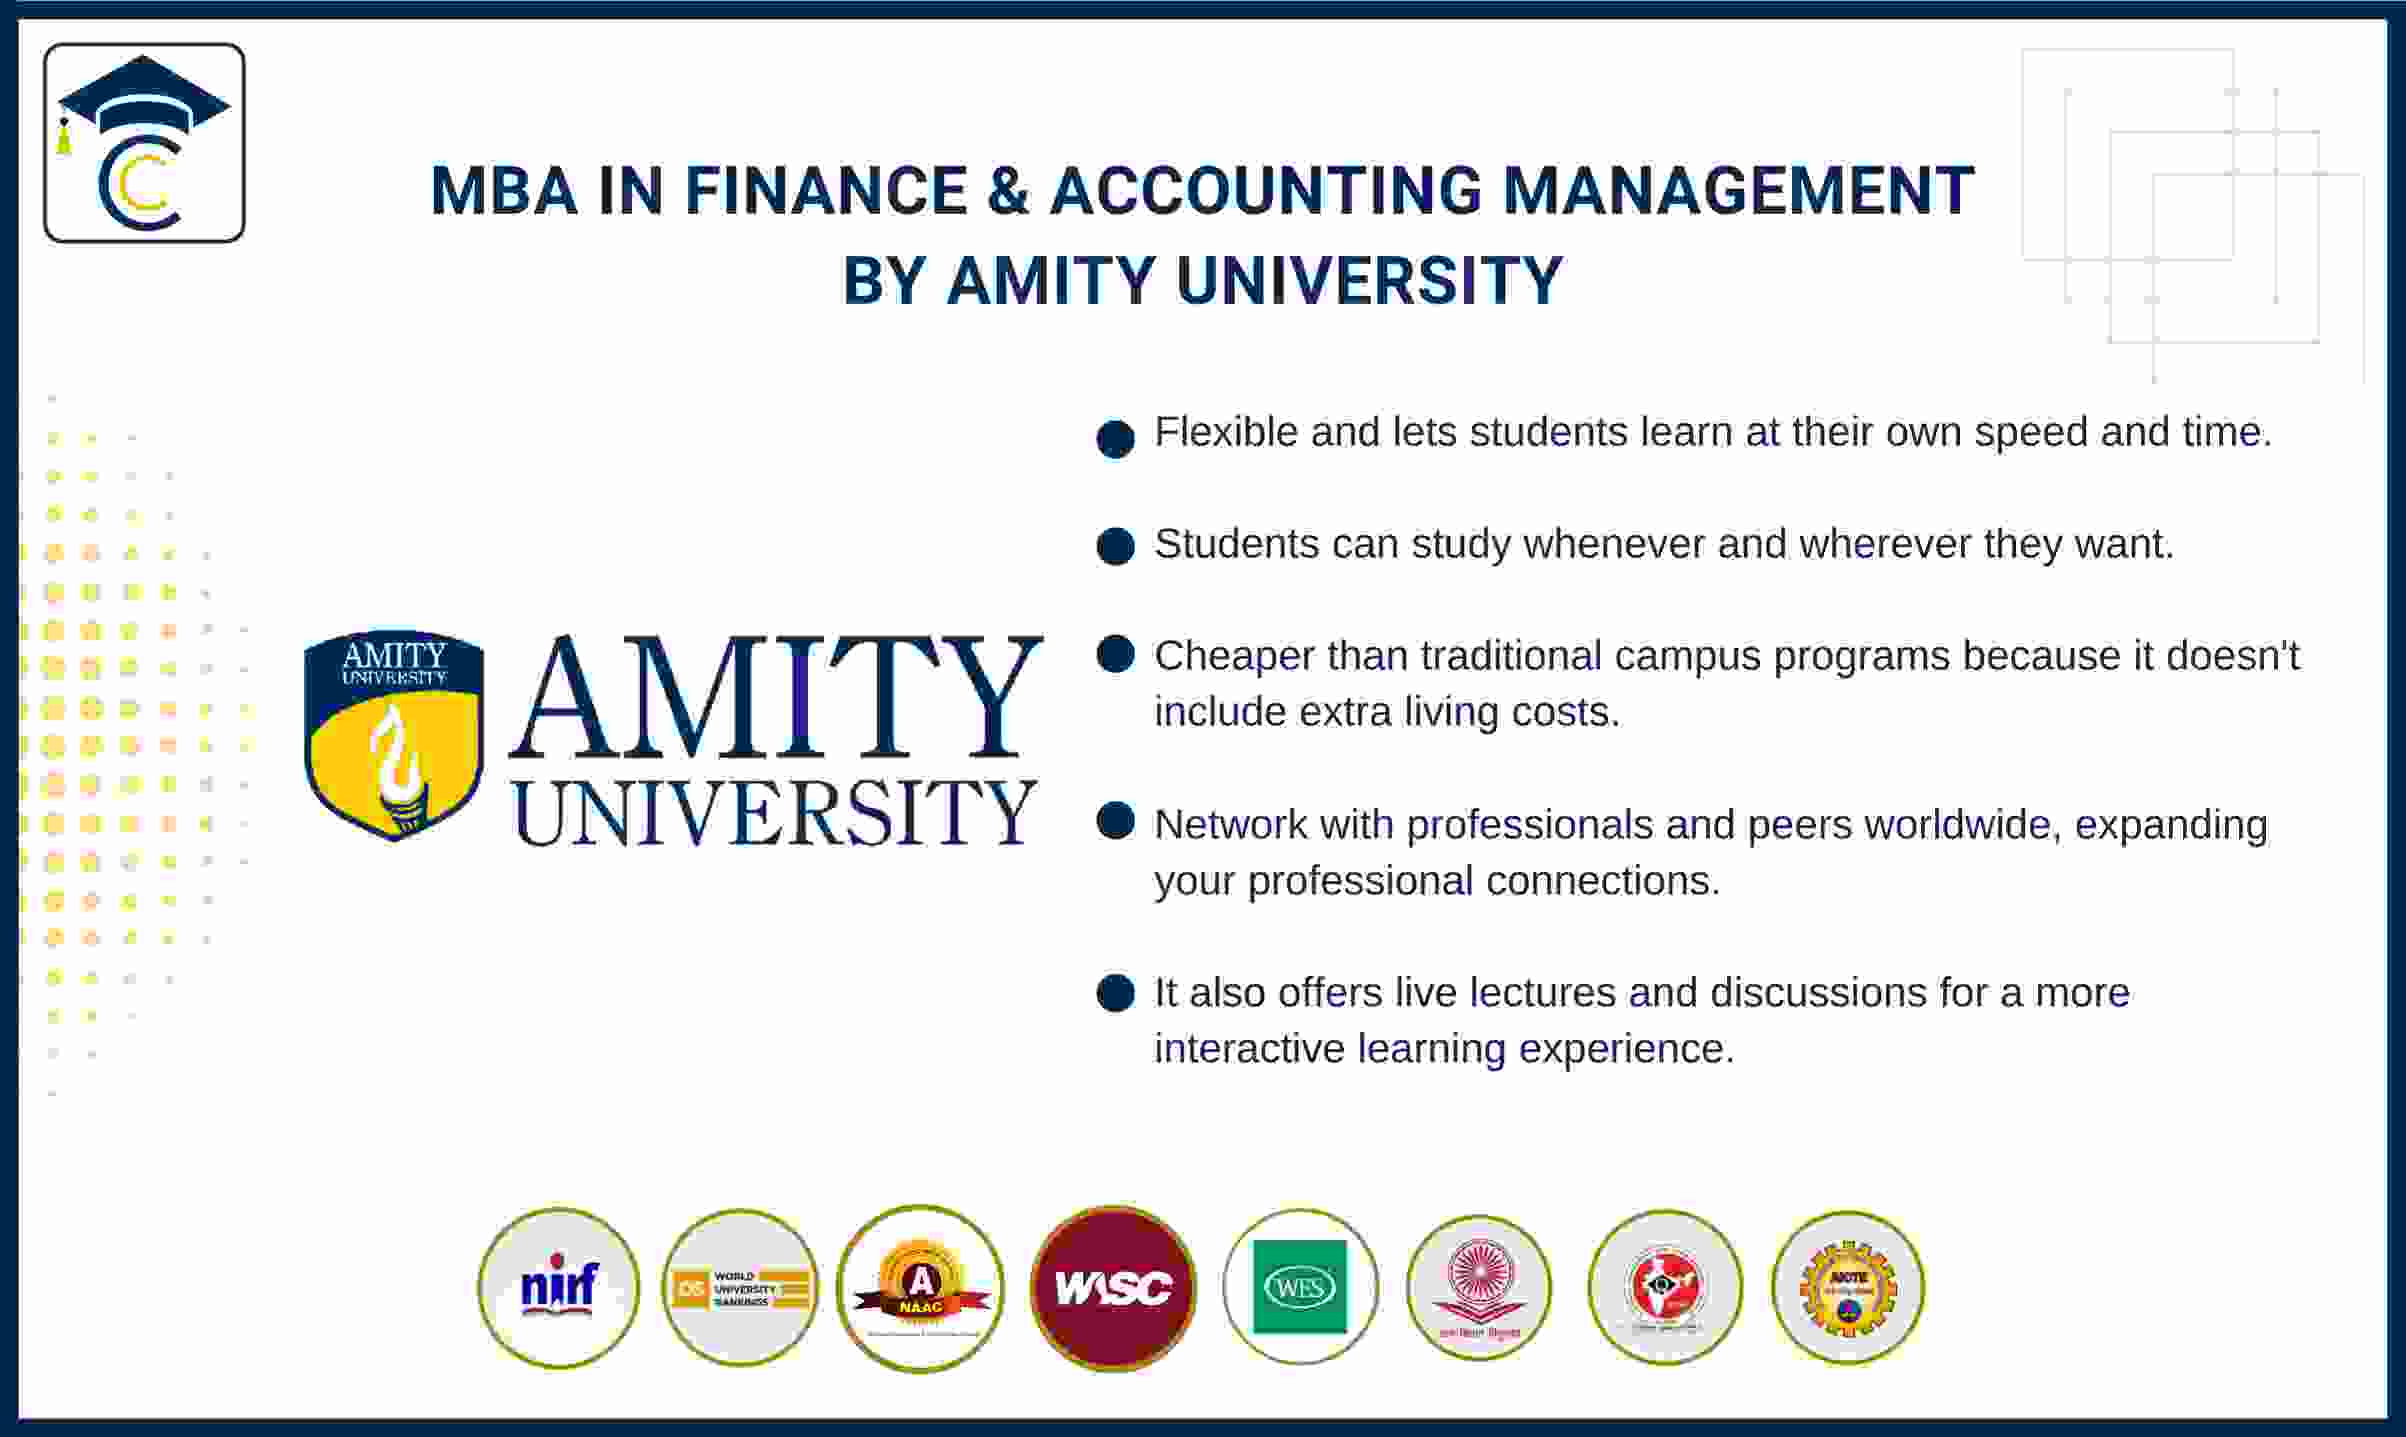 mba-in-finance-and-accounting-management-amity-university